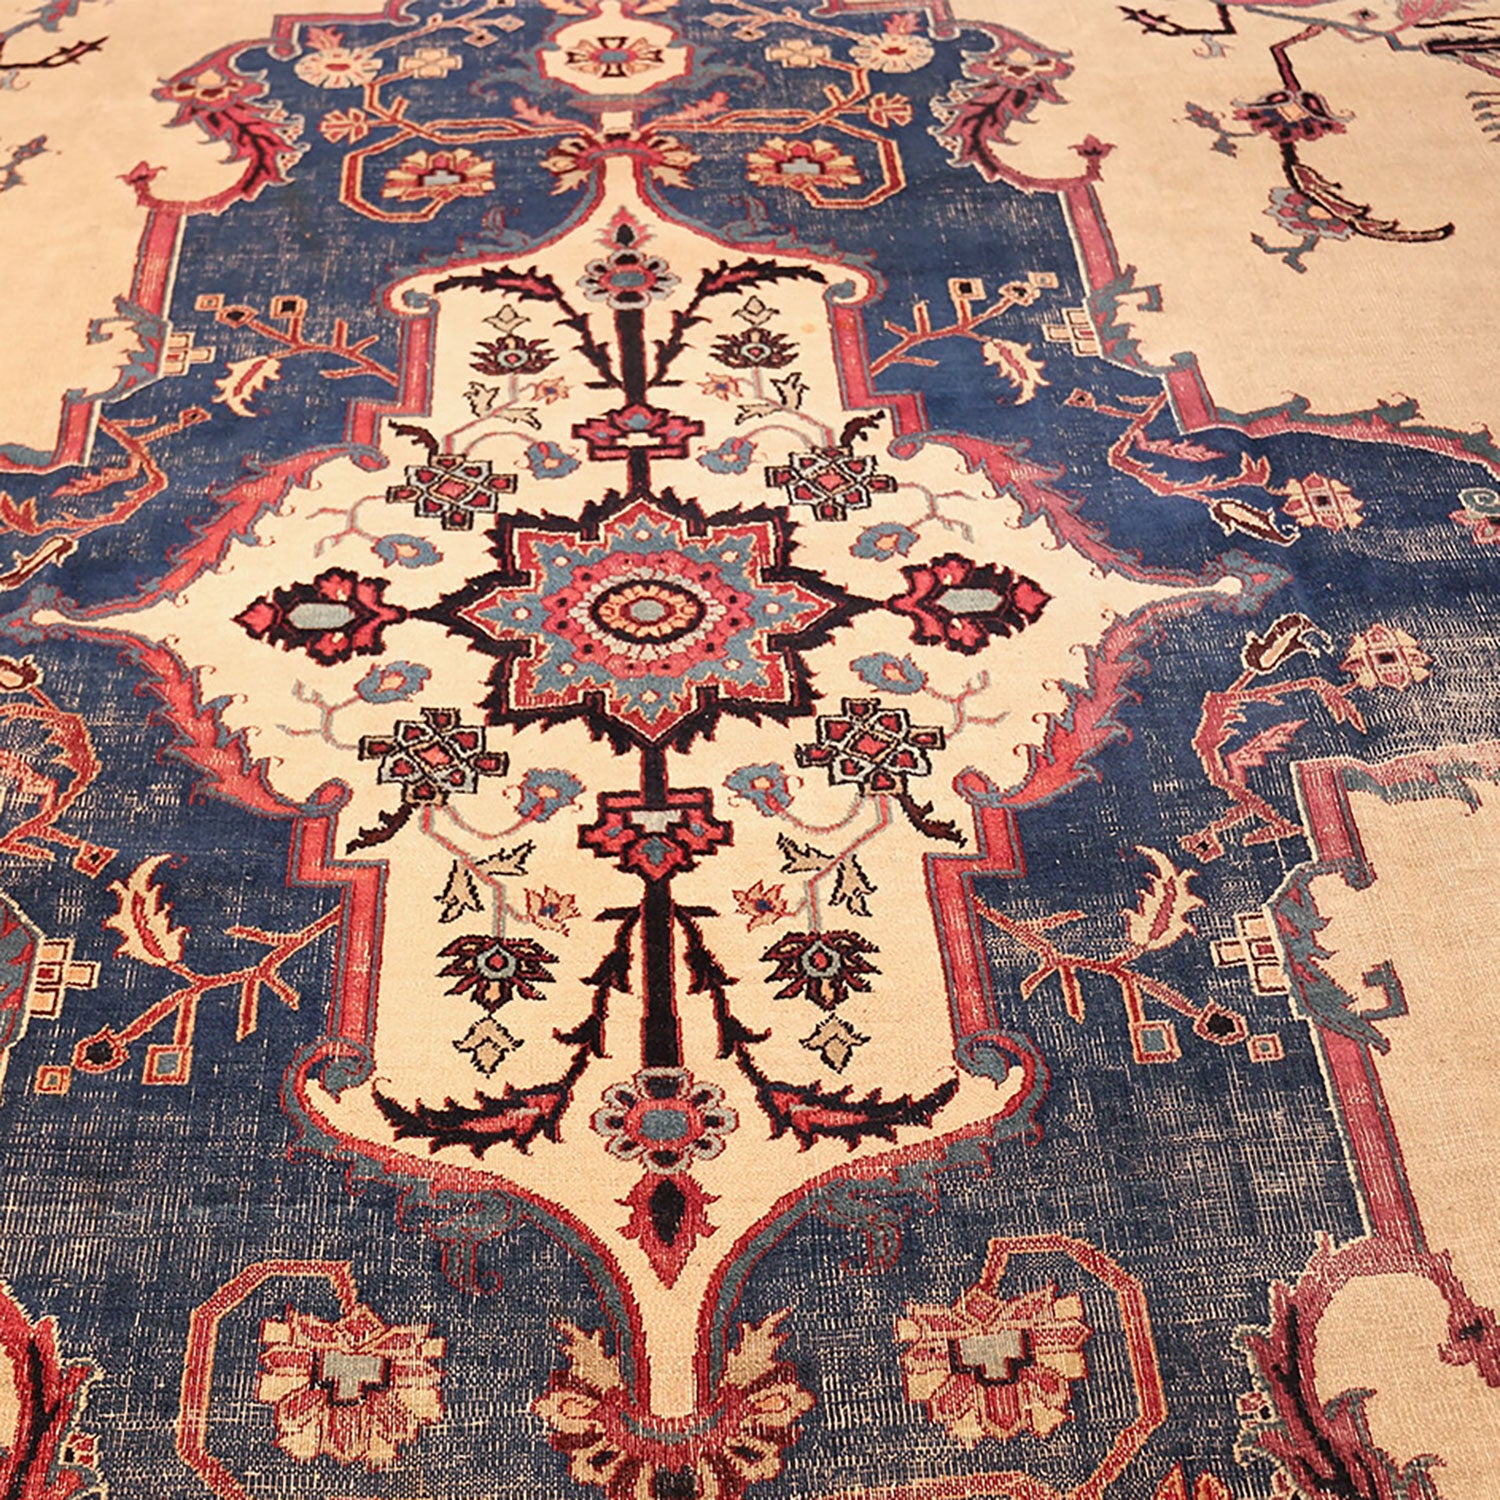 Close-up of an ornate, detailed Persian-inspired carpet with intricate design.